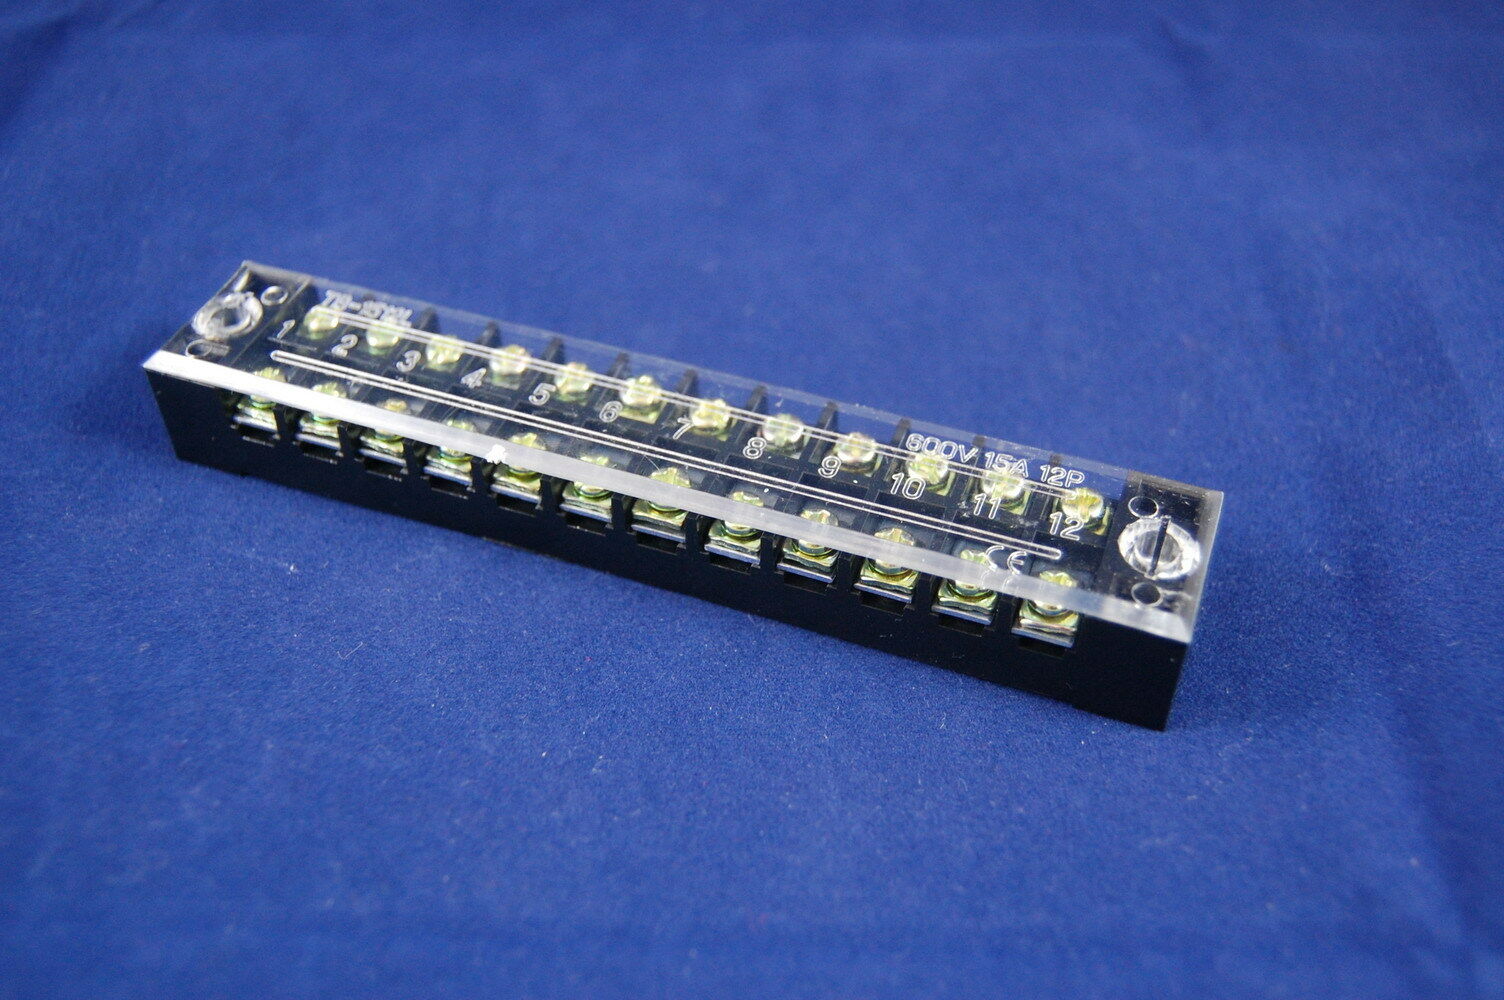 Lot of 5pcs 12 Position 15A 600V Barrier Dual Row Terminal Block/Strip w/Cover